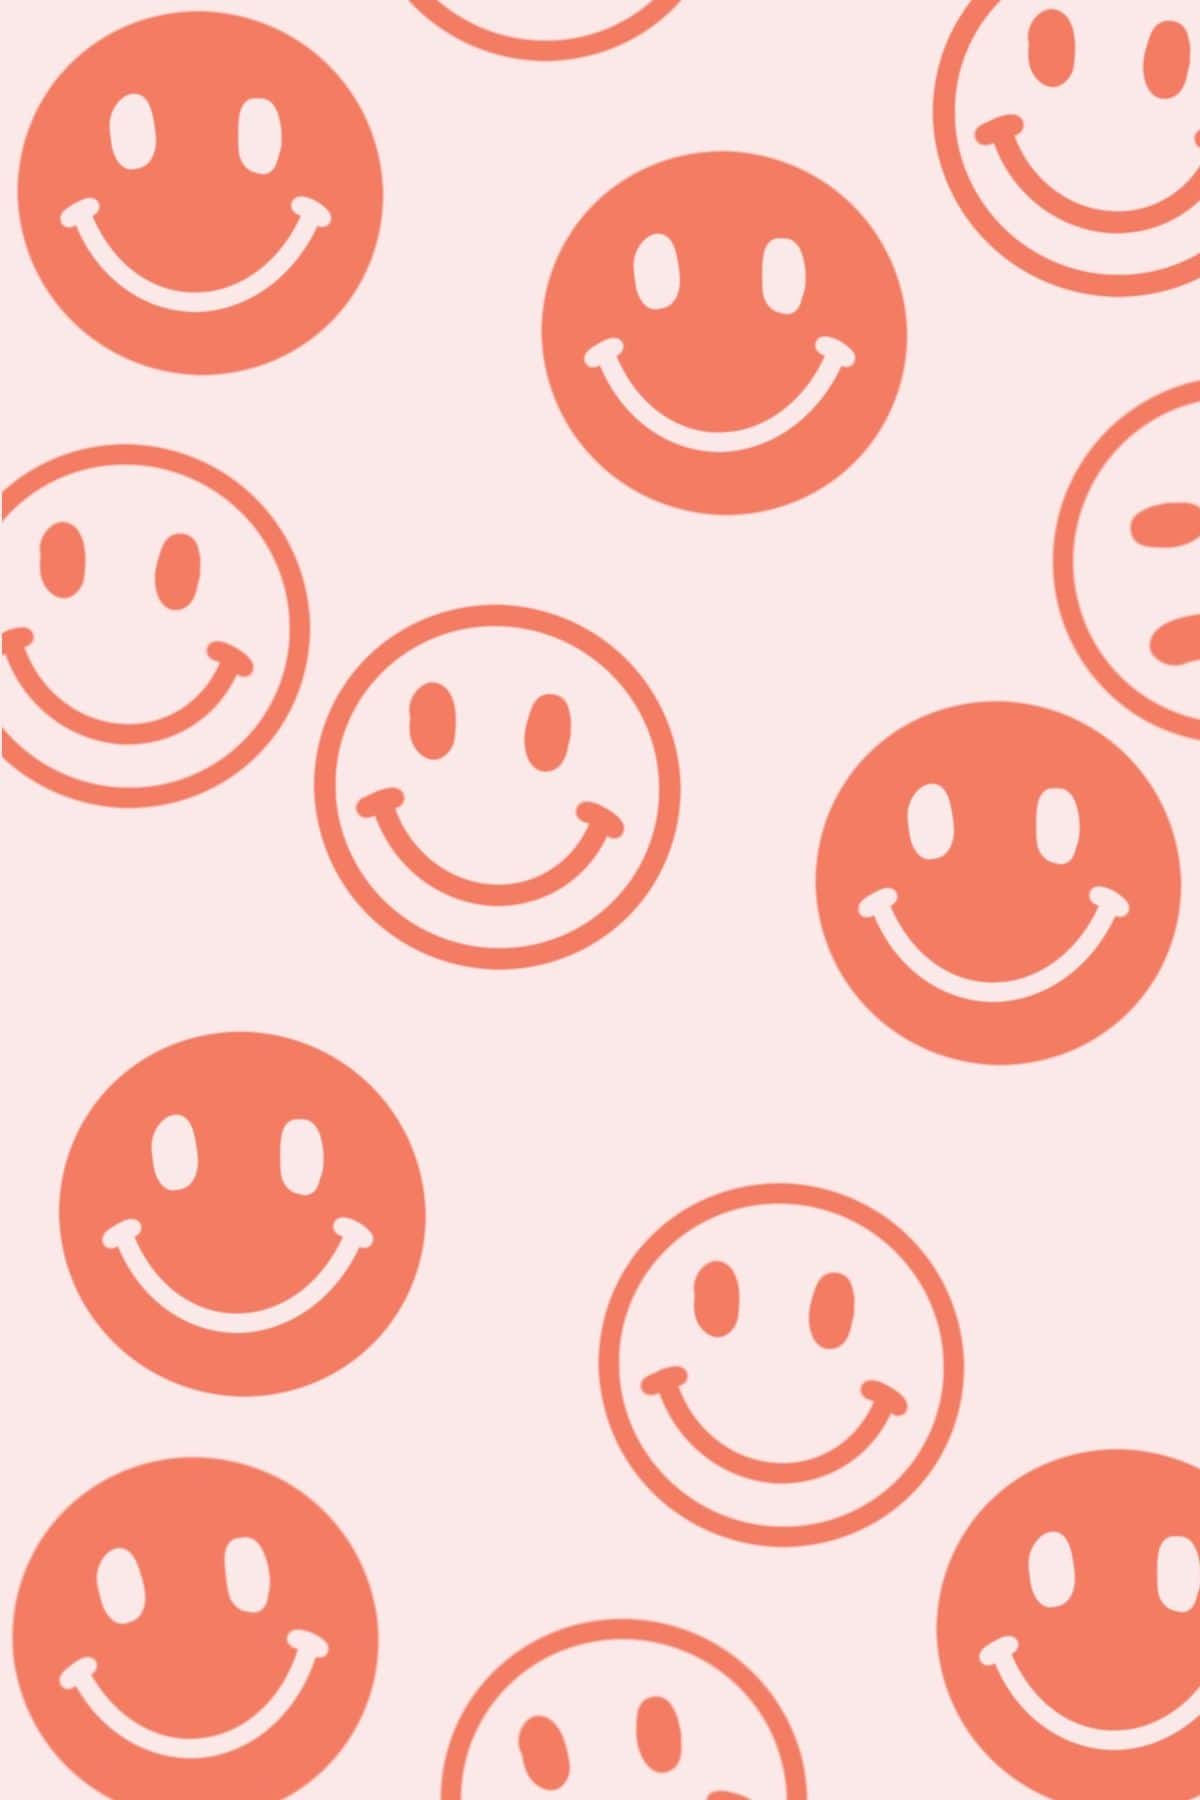 Smiley Face Wallpaper - NawPic